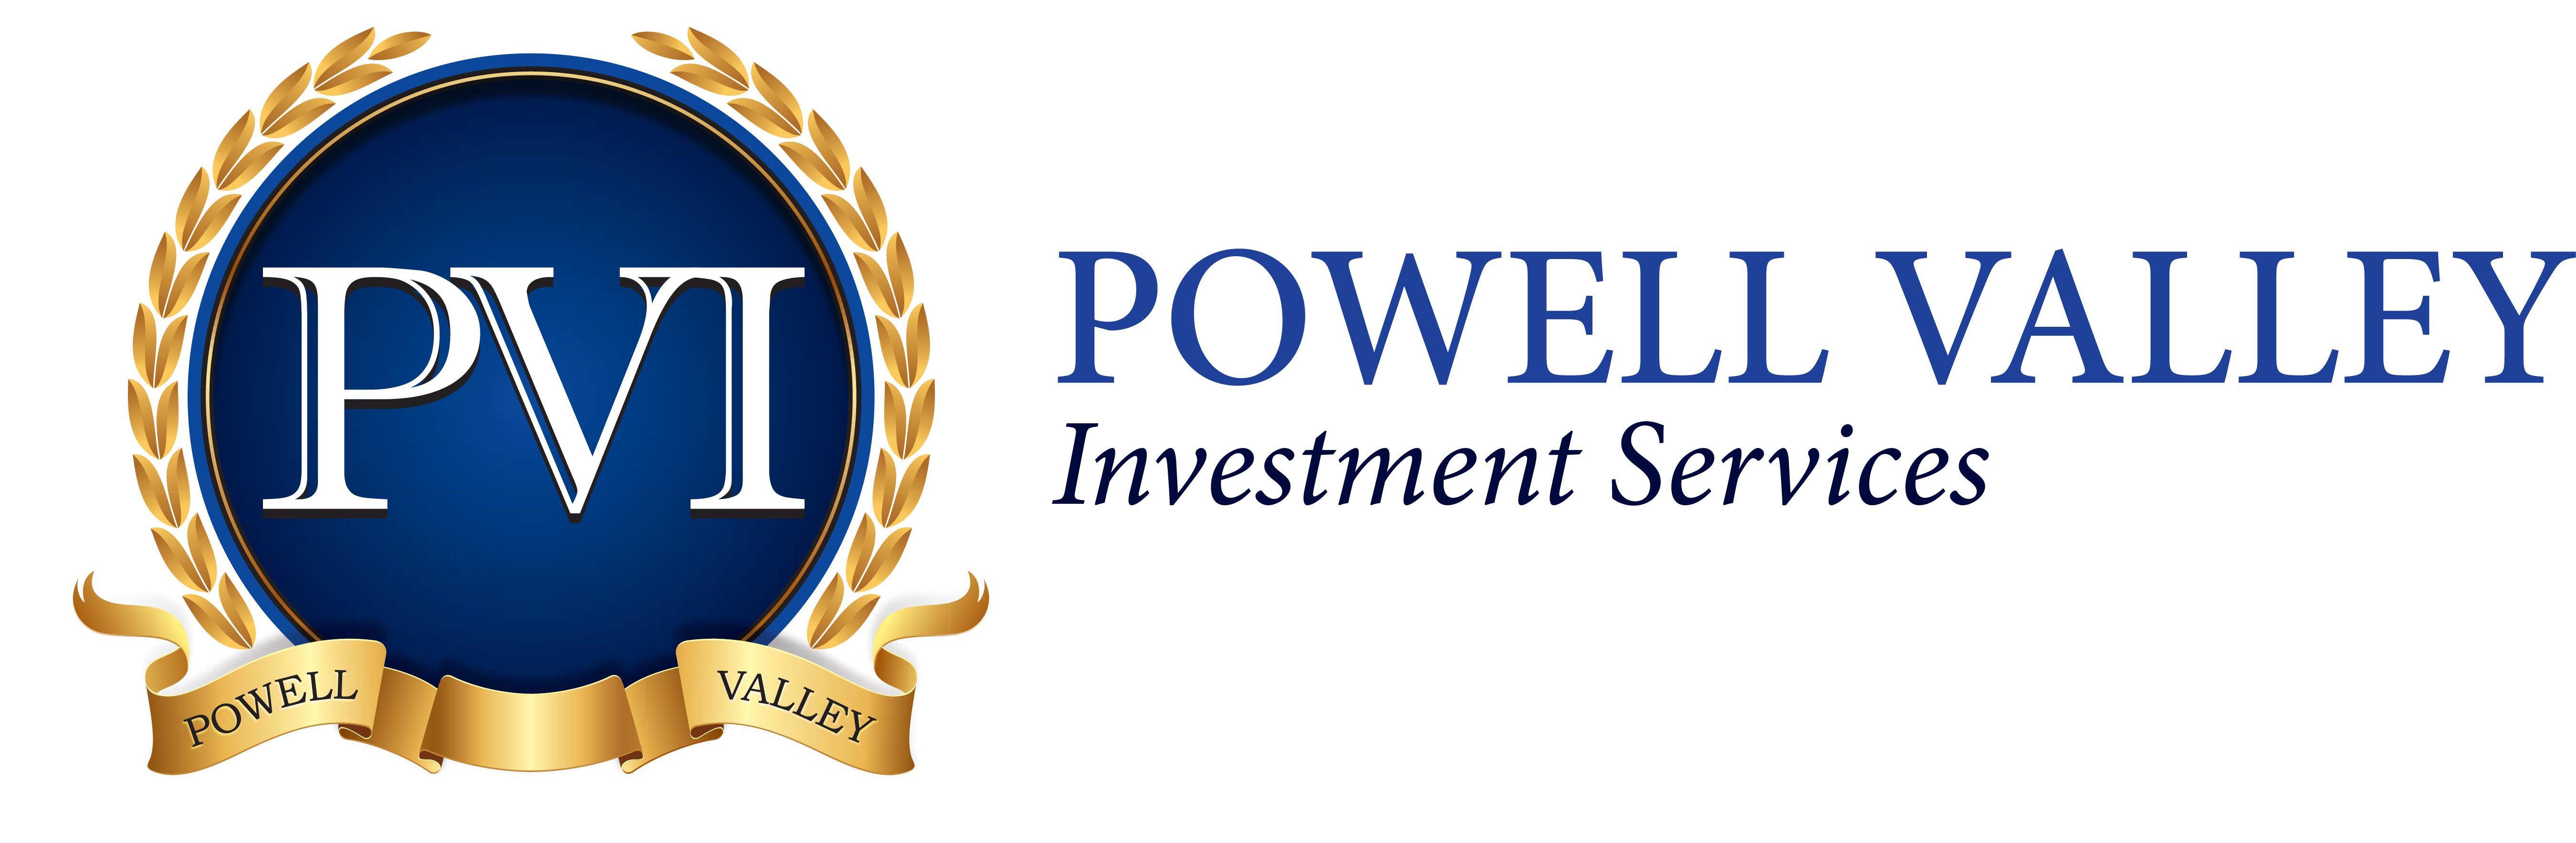 Powell Valley Investment Services Logo